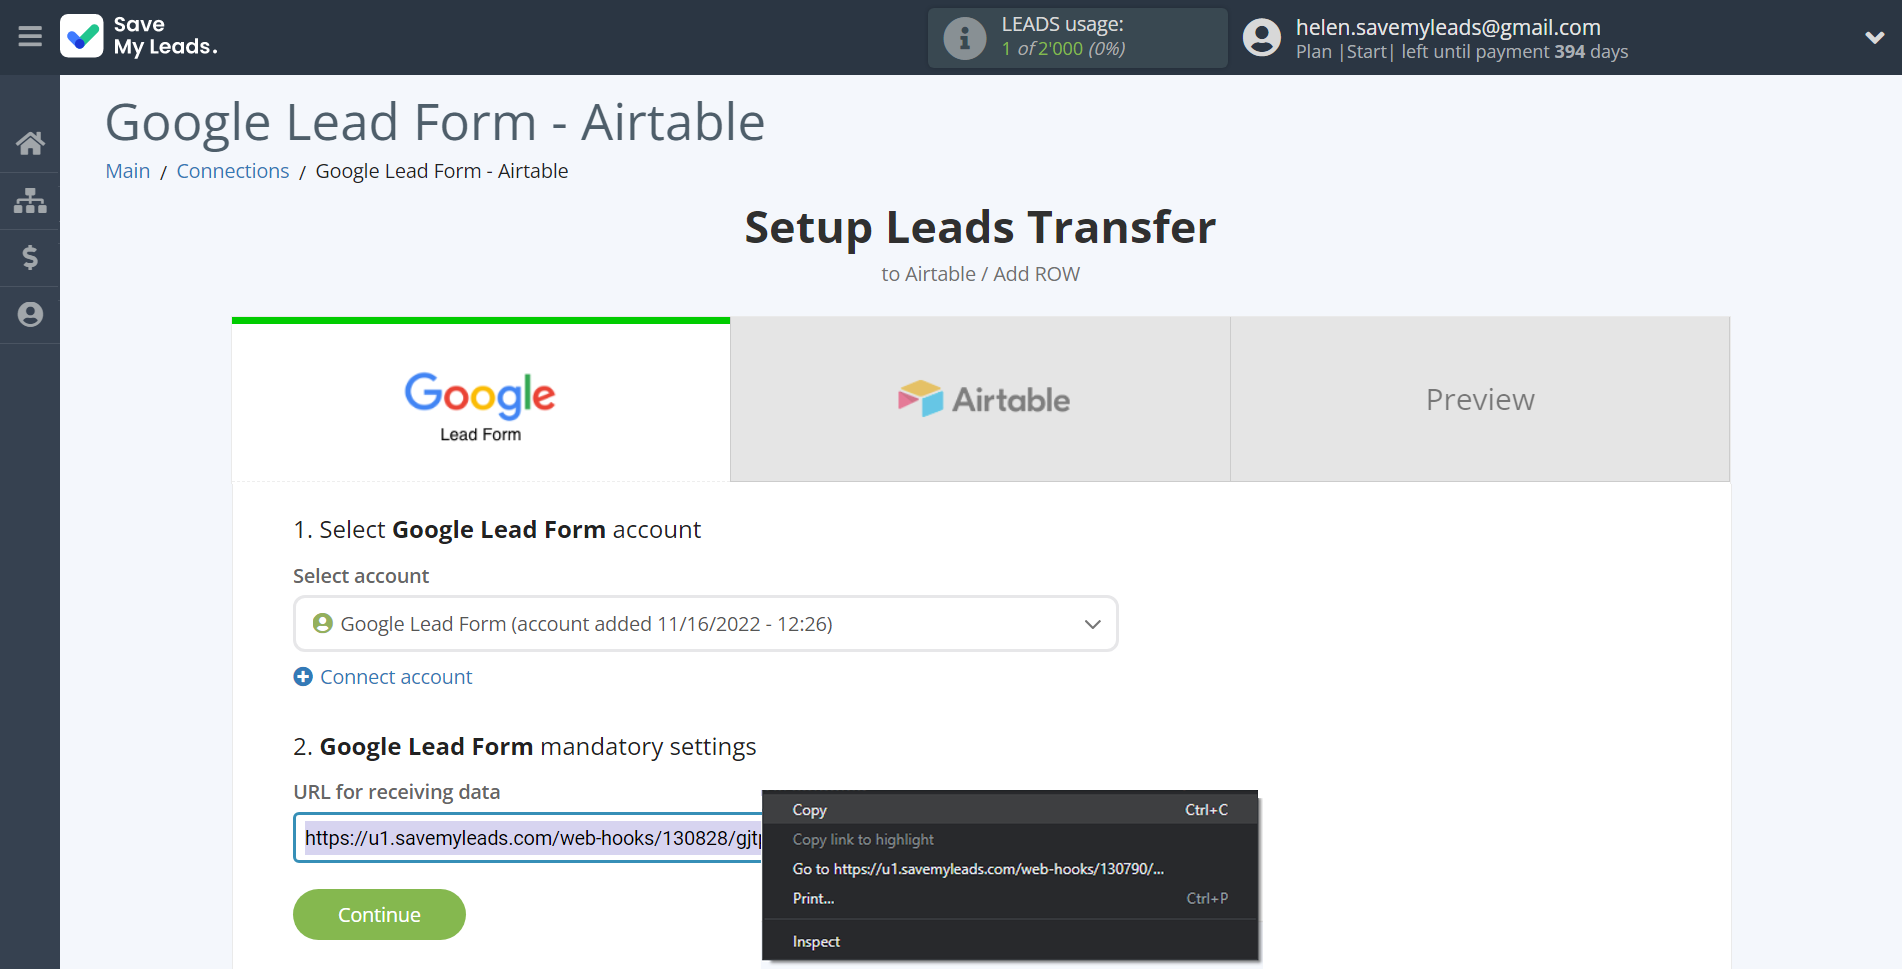 How to Connect Google Lead Form with AirTable | Data Source account connection